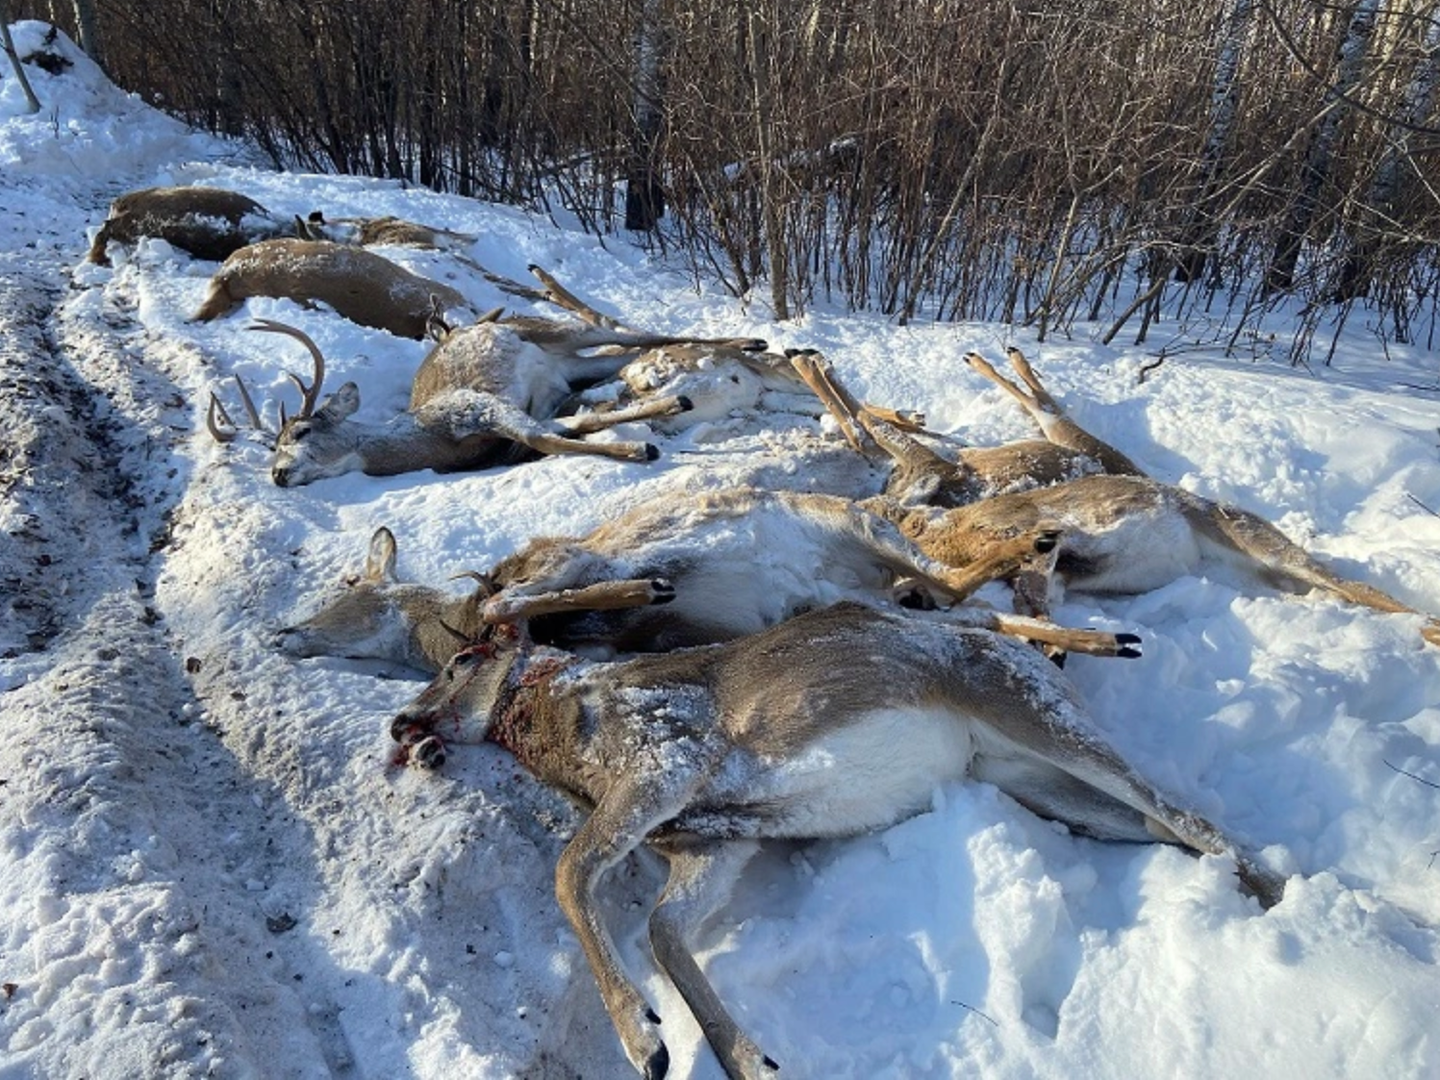 Conservation officers in Saskatchewan recovered 12 illegally taken whitetails.